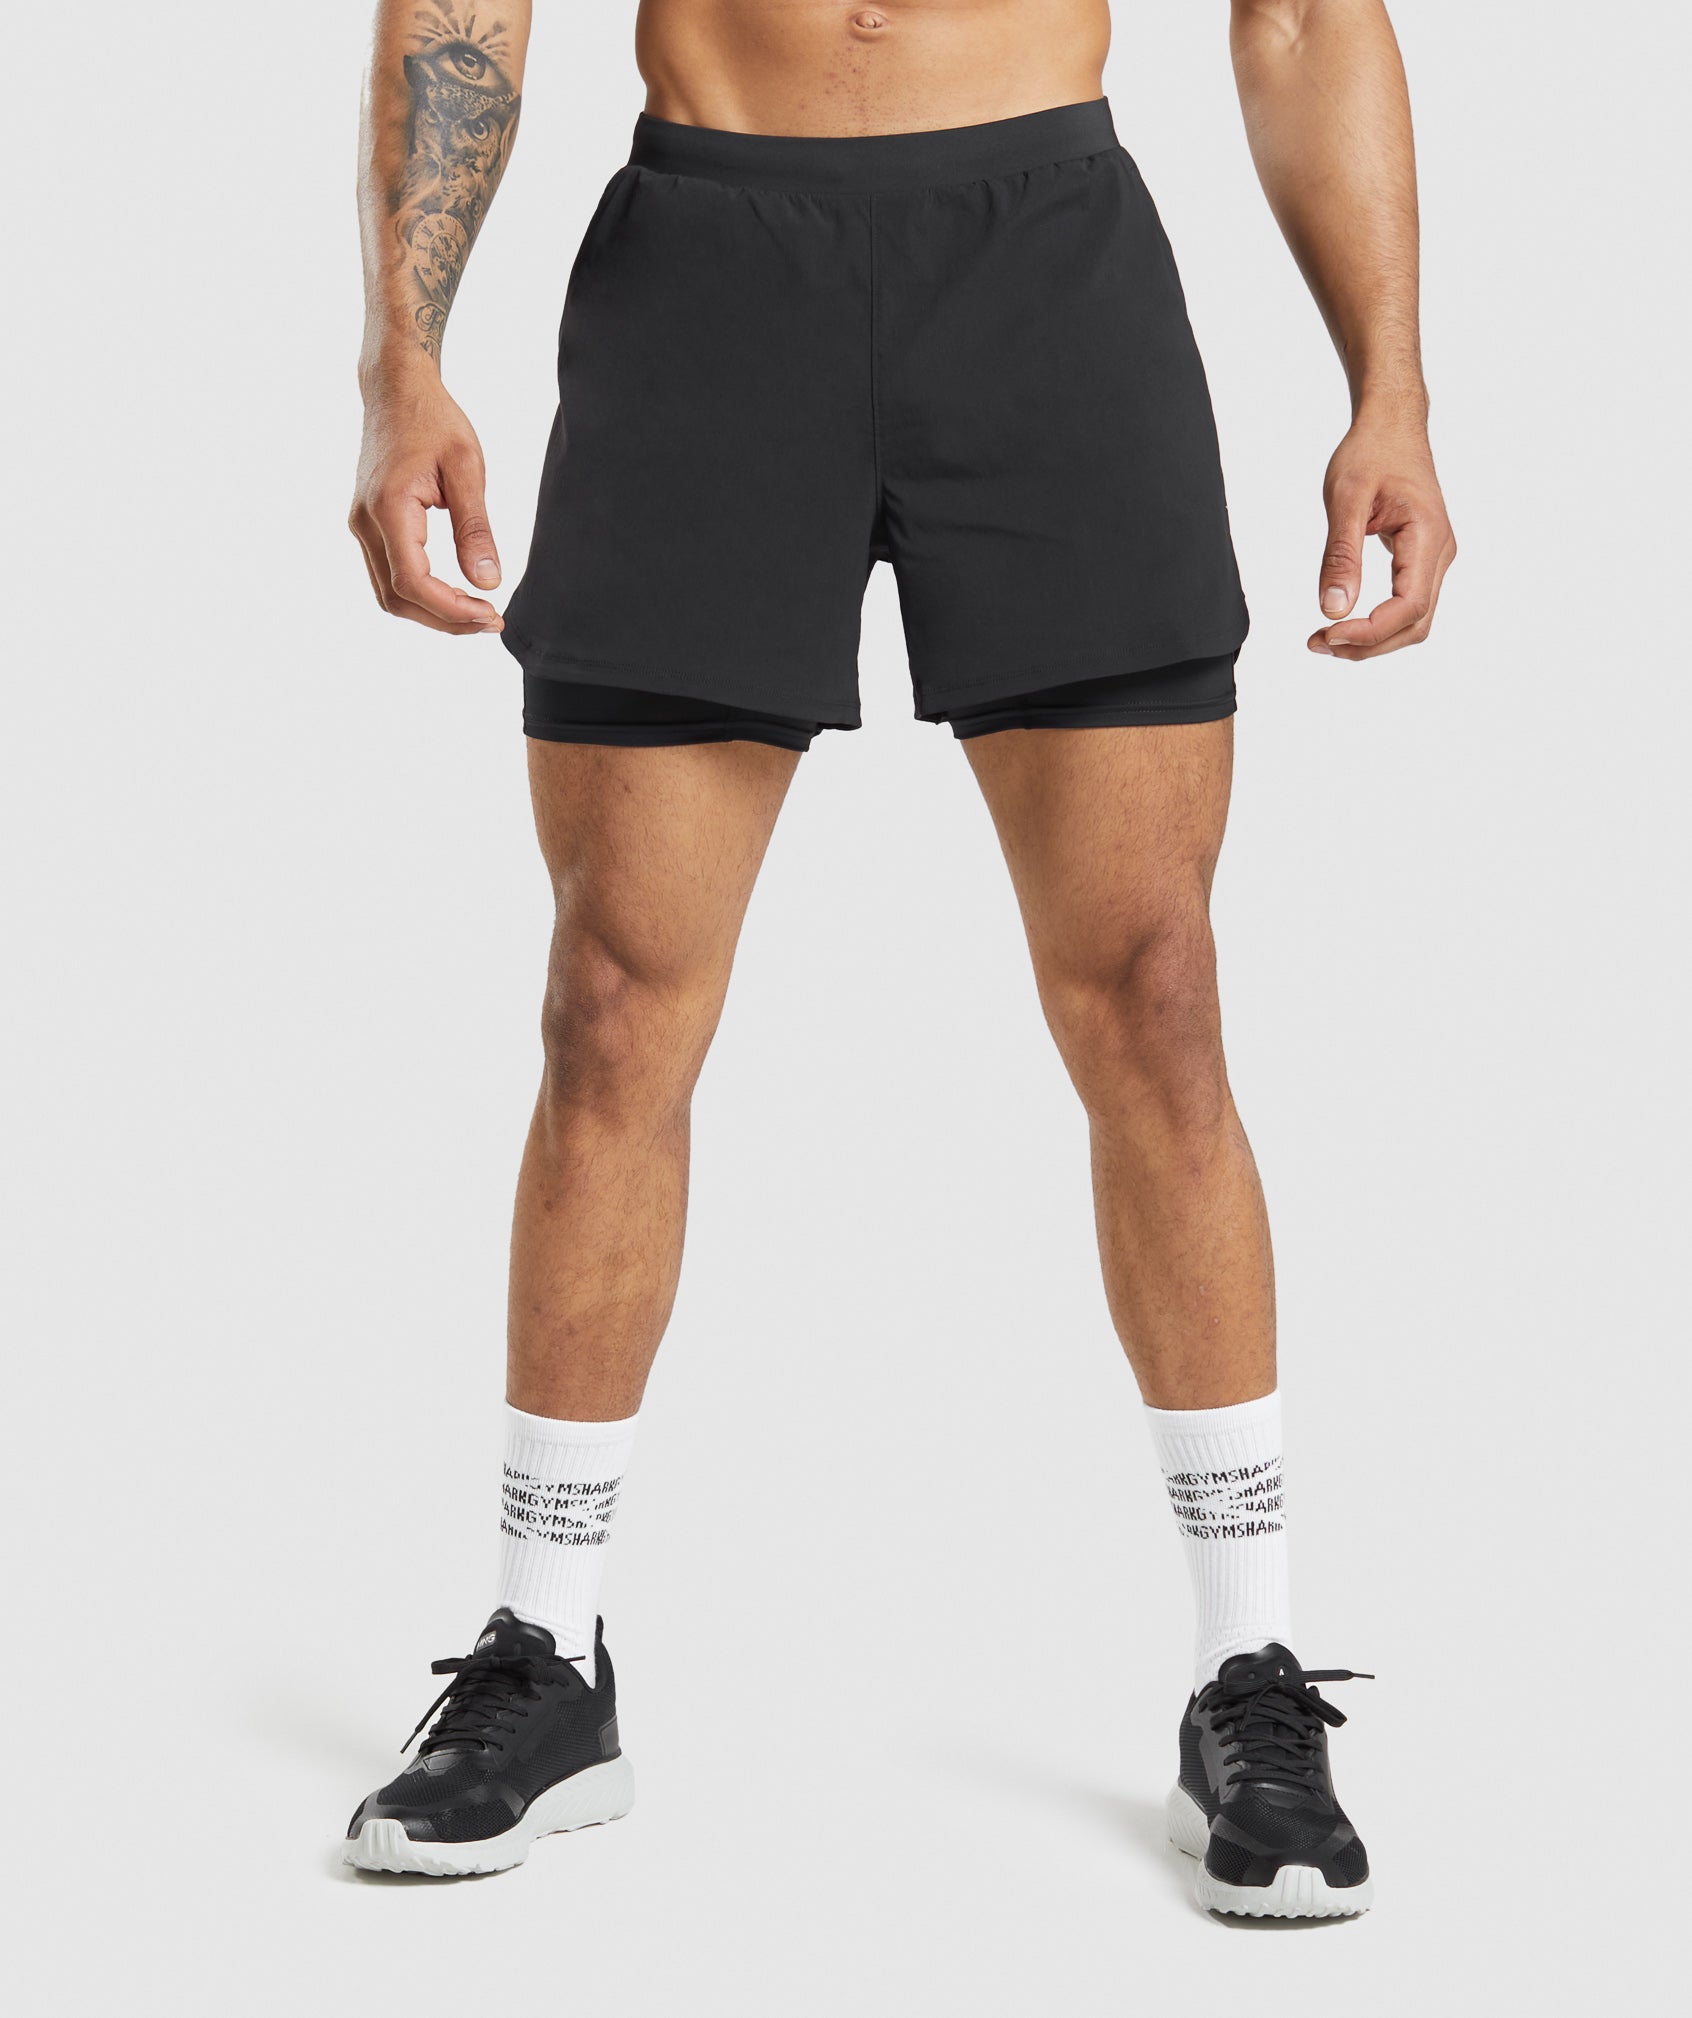 Speed Evolve 5" 2 In 1 Shorts in Black - view 1